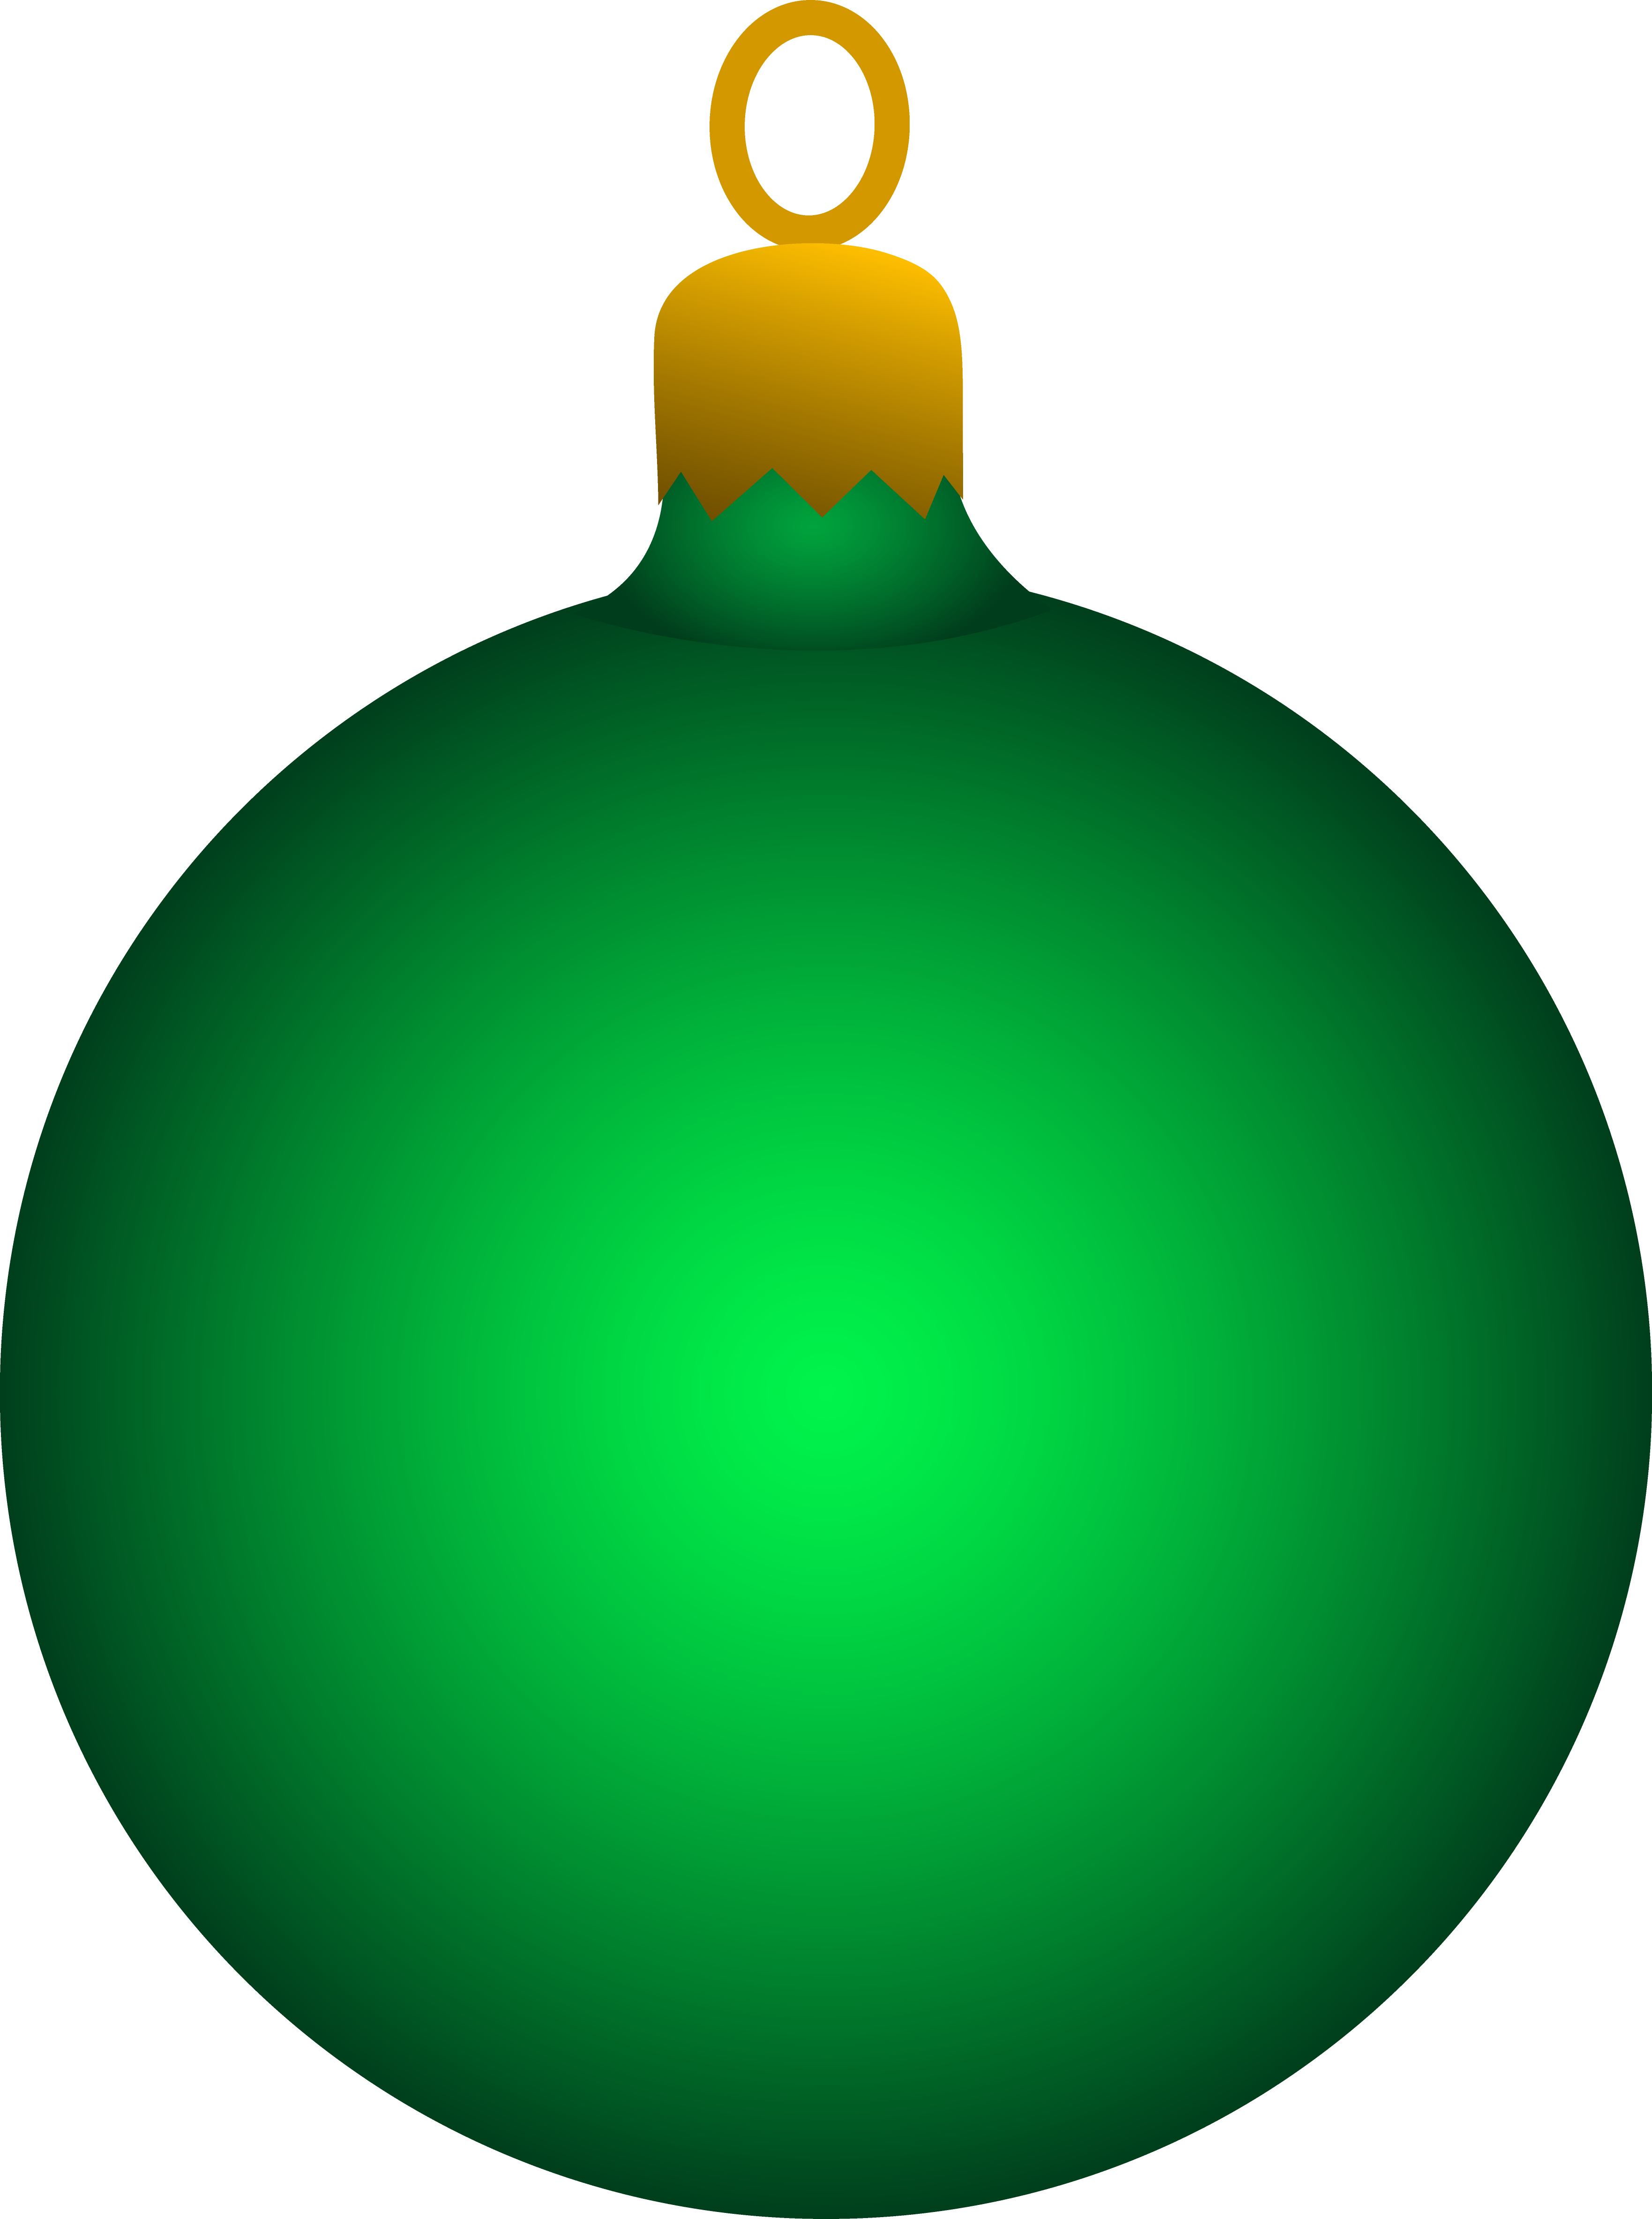 Christmas tree ball ornament clipart 20 free Cliparts | Download images